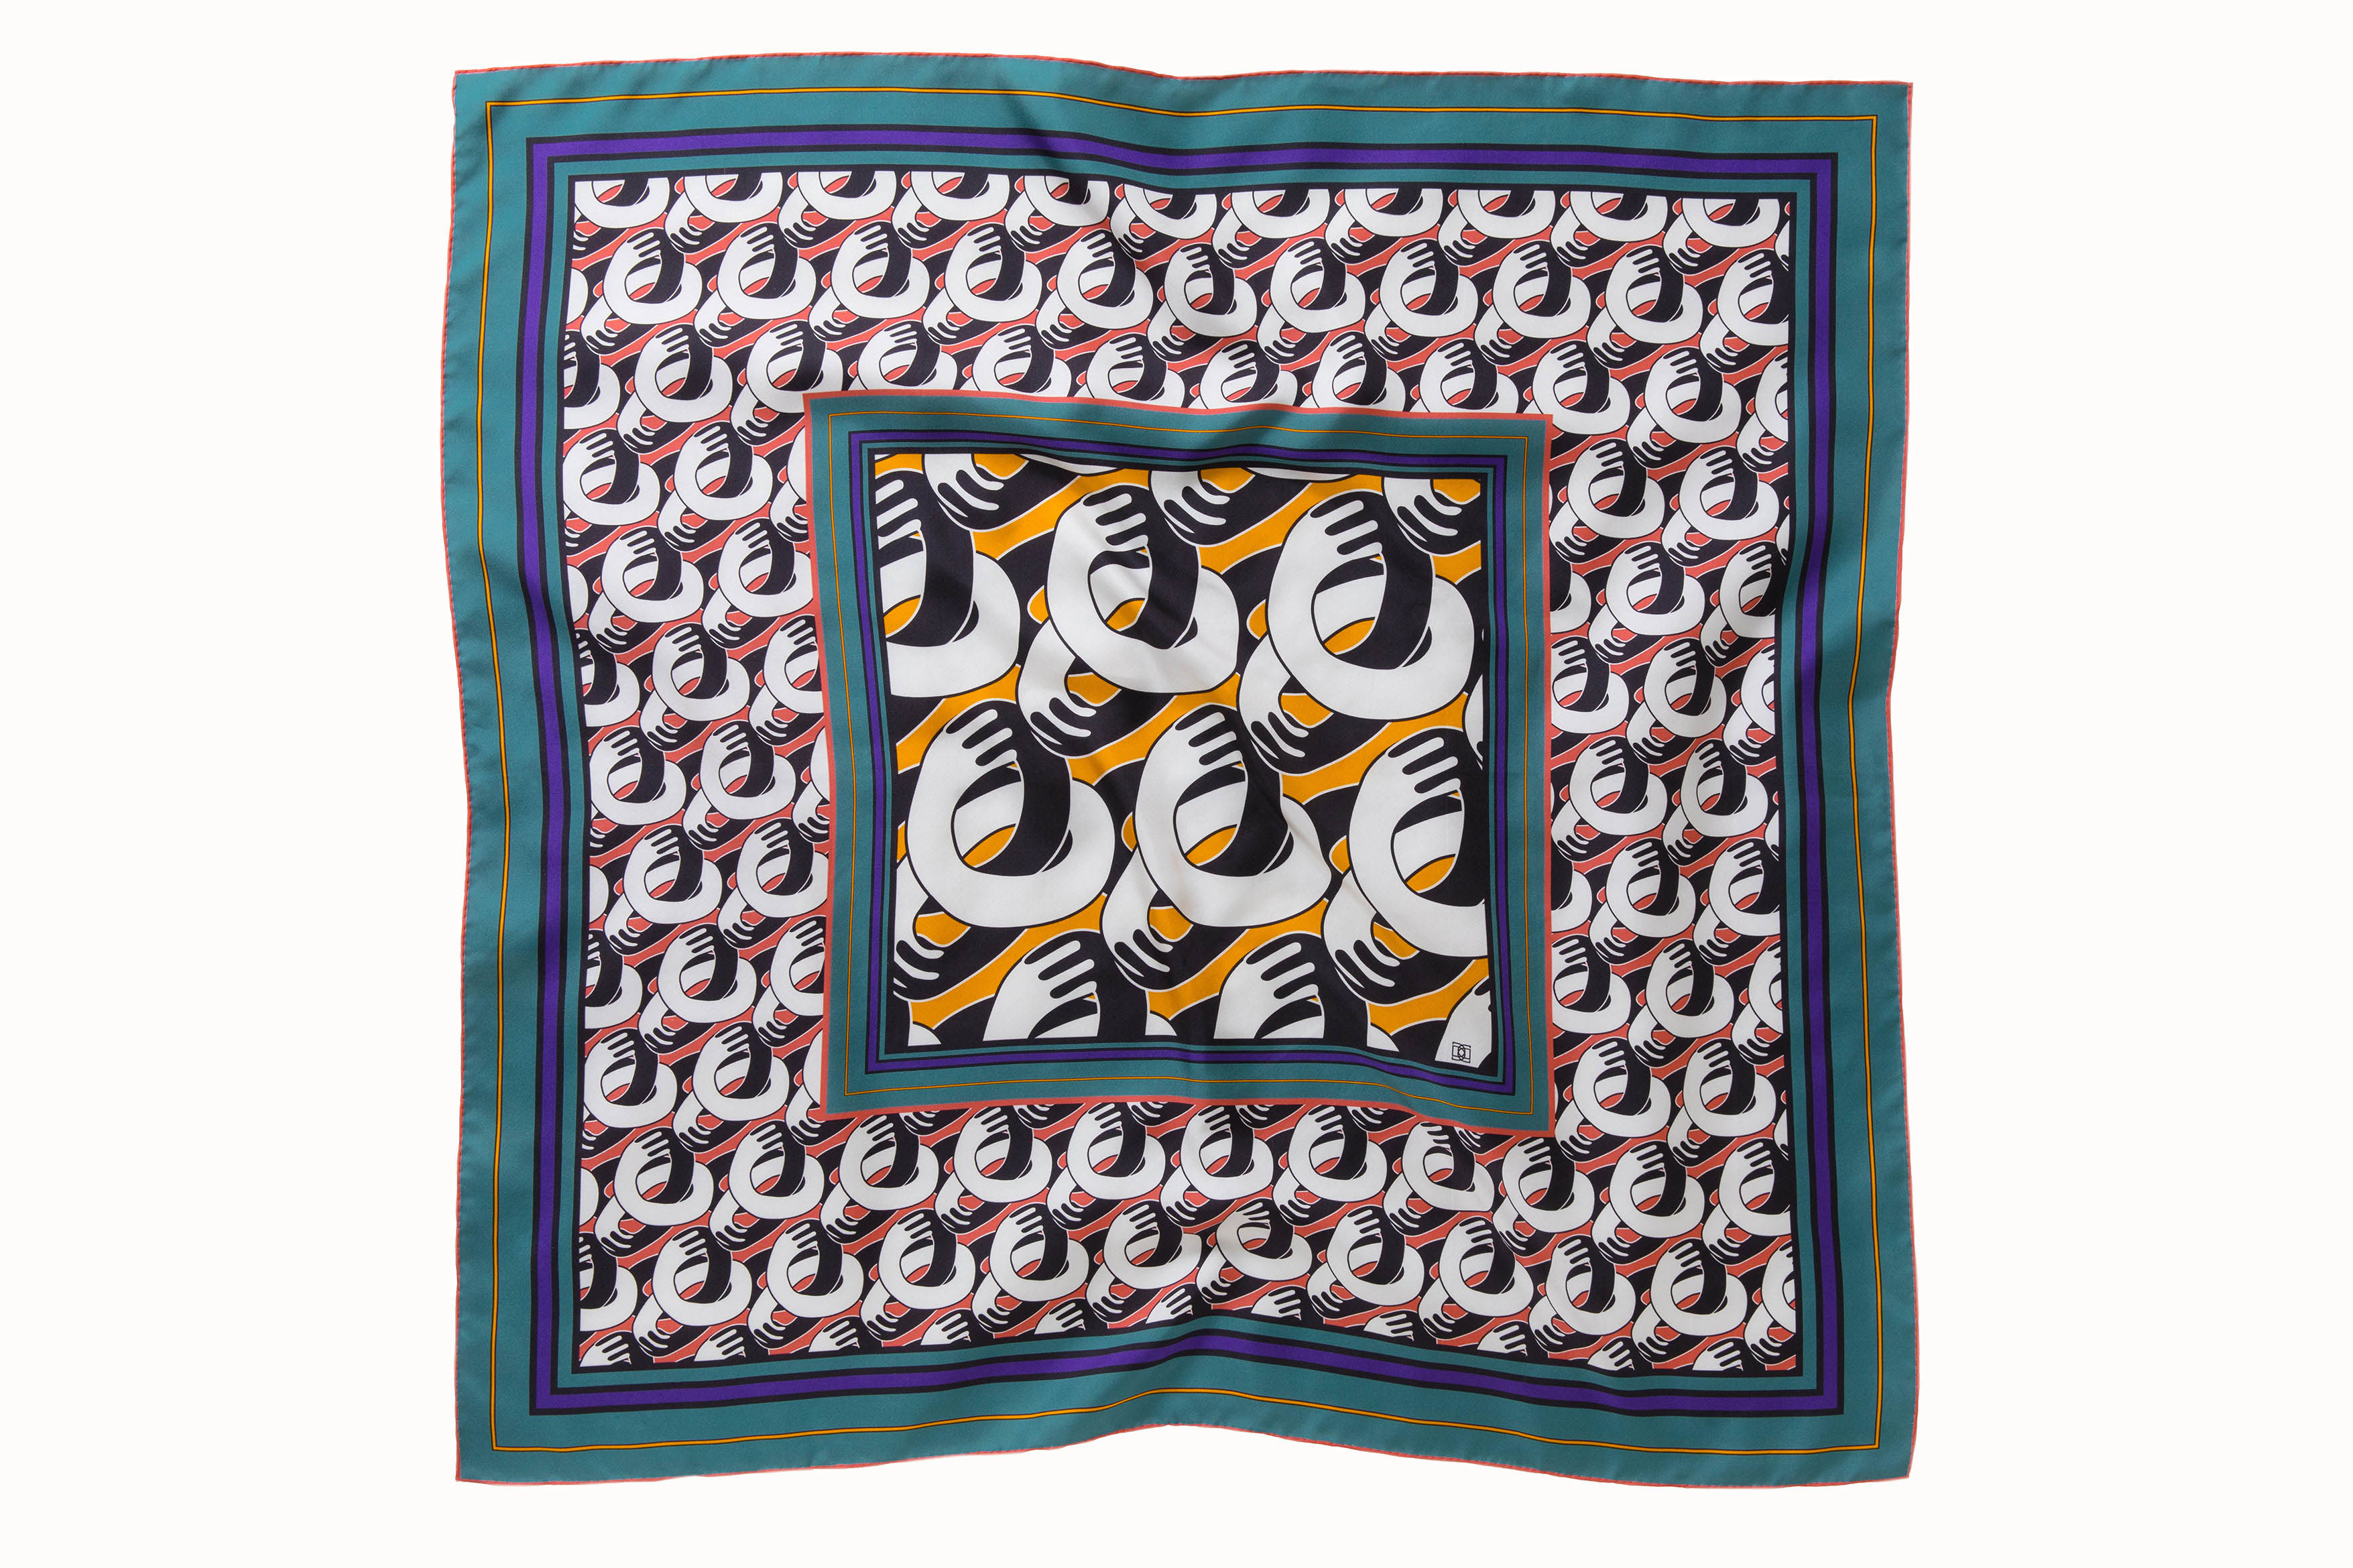 Flatlay image of 100% silk square scarf featuring a motif of black and white intertwined hands. The larger scale hands motif in the center is on a pumpkin colored background and is surrounded by smaller scale hands on a pink coral colored background. The scarf has a green and purple border.